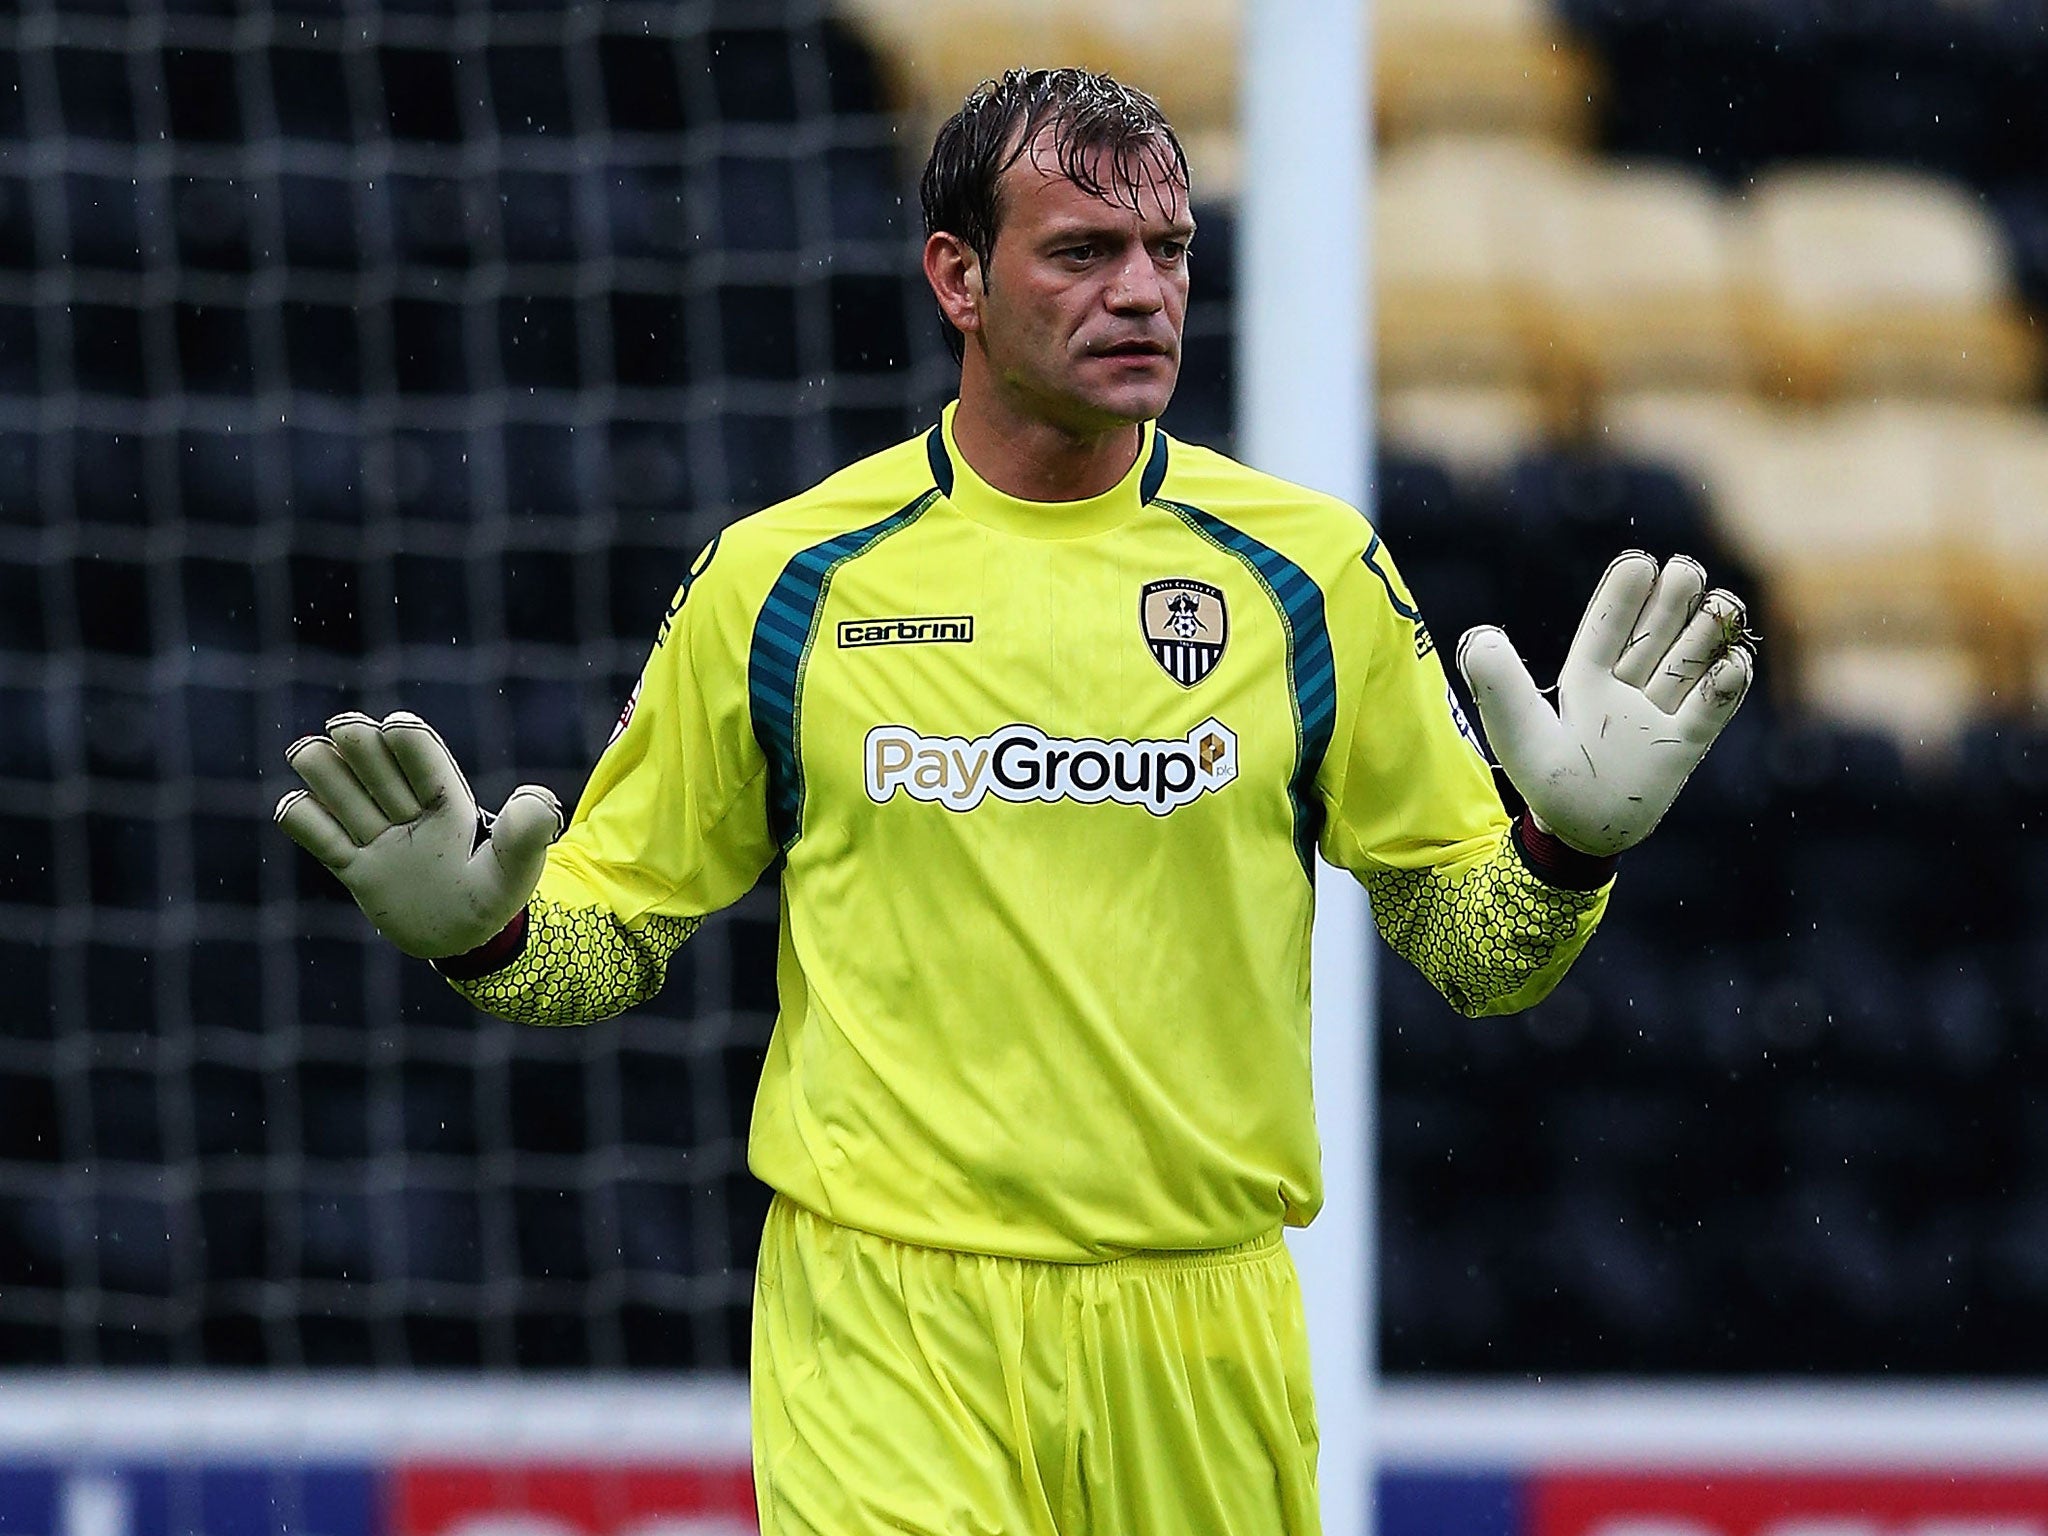 Roy Carroll in action during Notts County's friendly against Osasuna last week